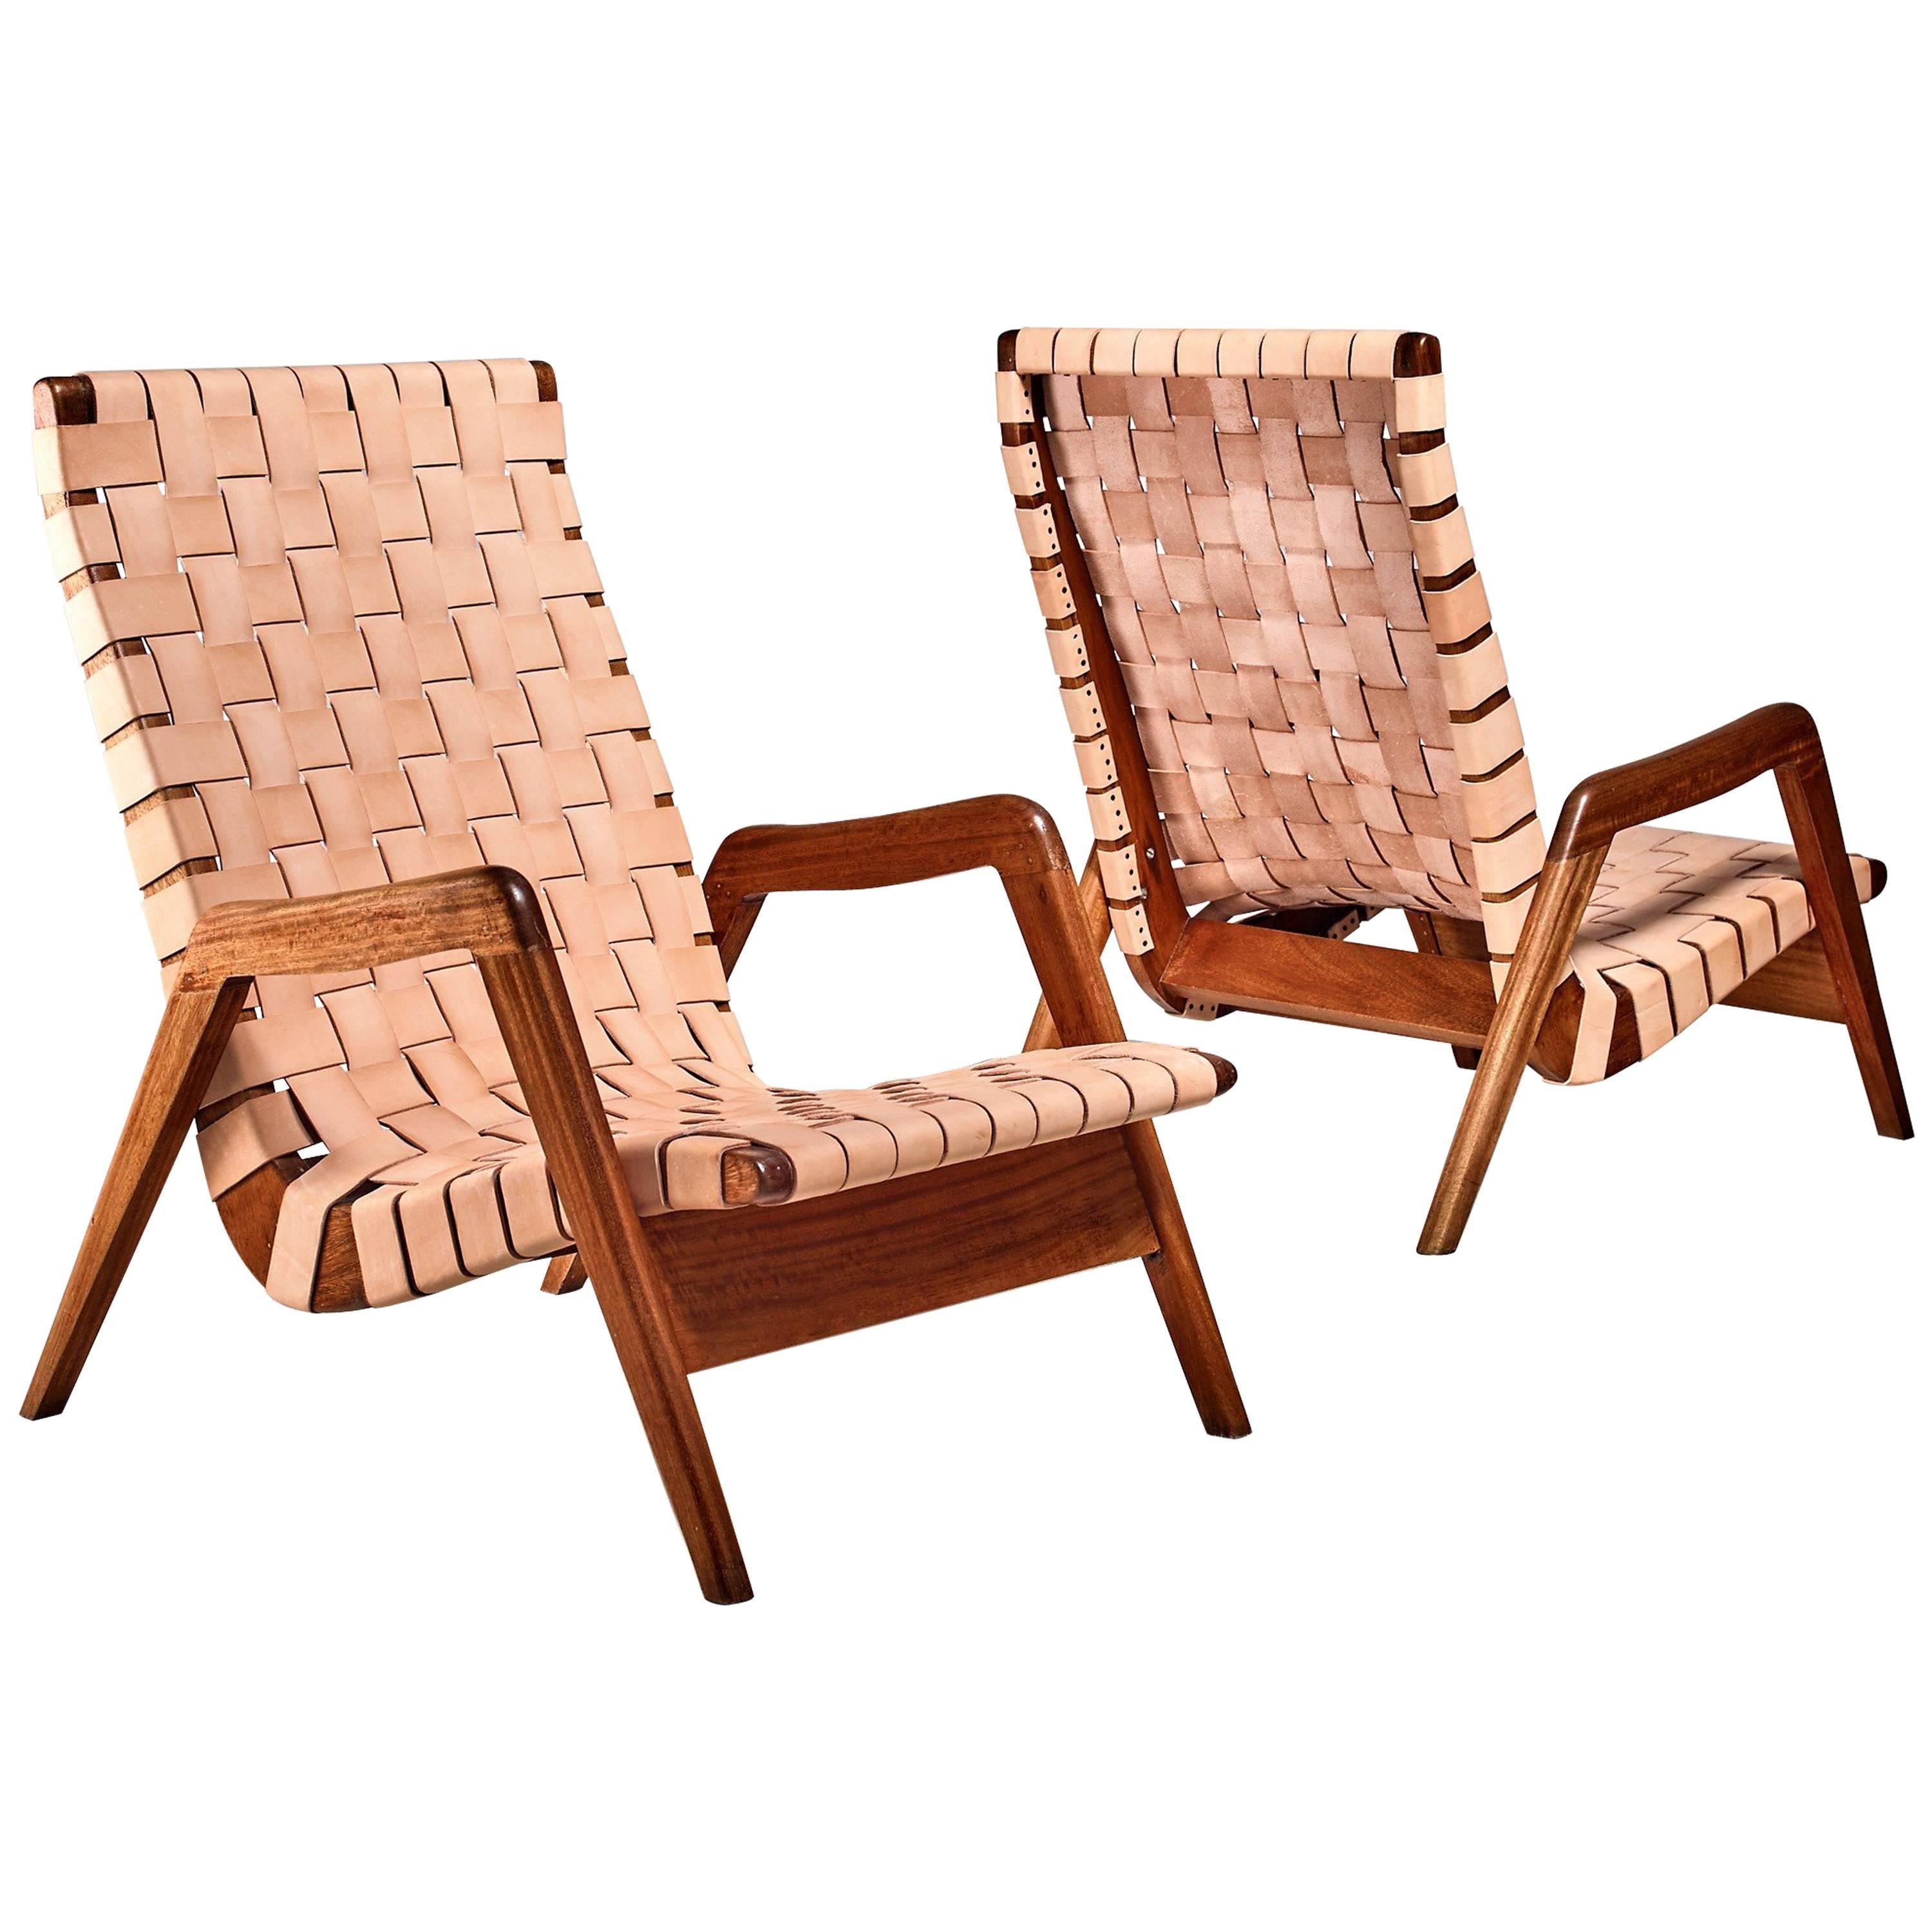 Pair of Mexican Lounge Chairs with Leather Webbing, 1950s For Sale